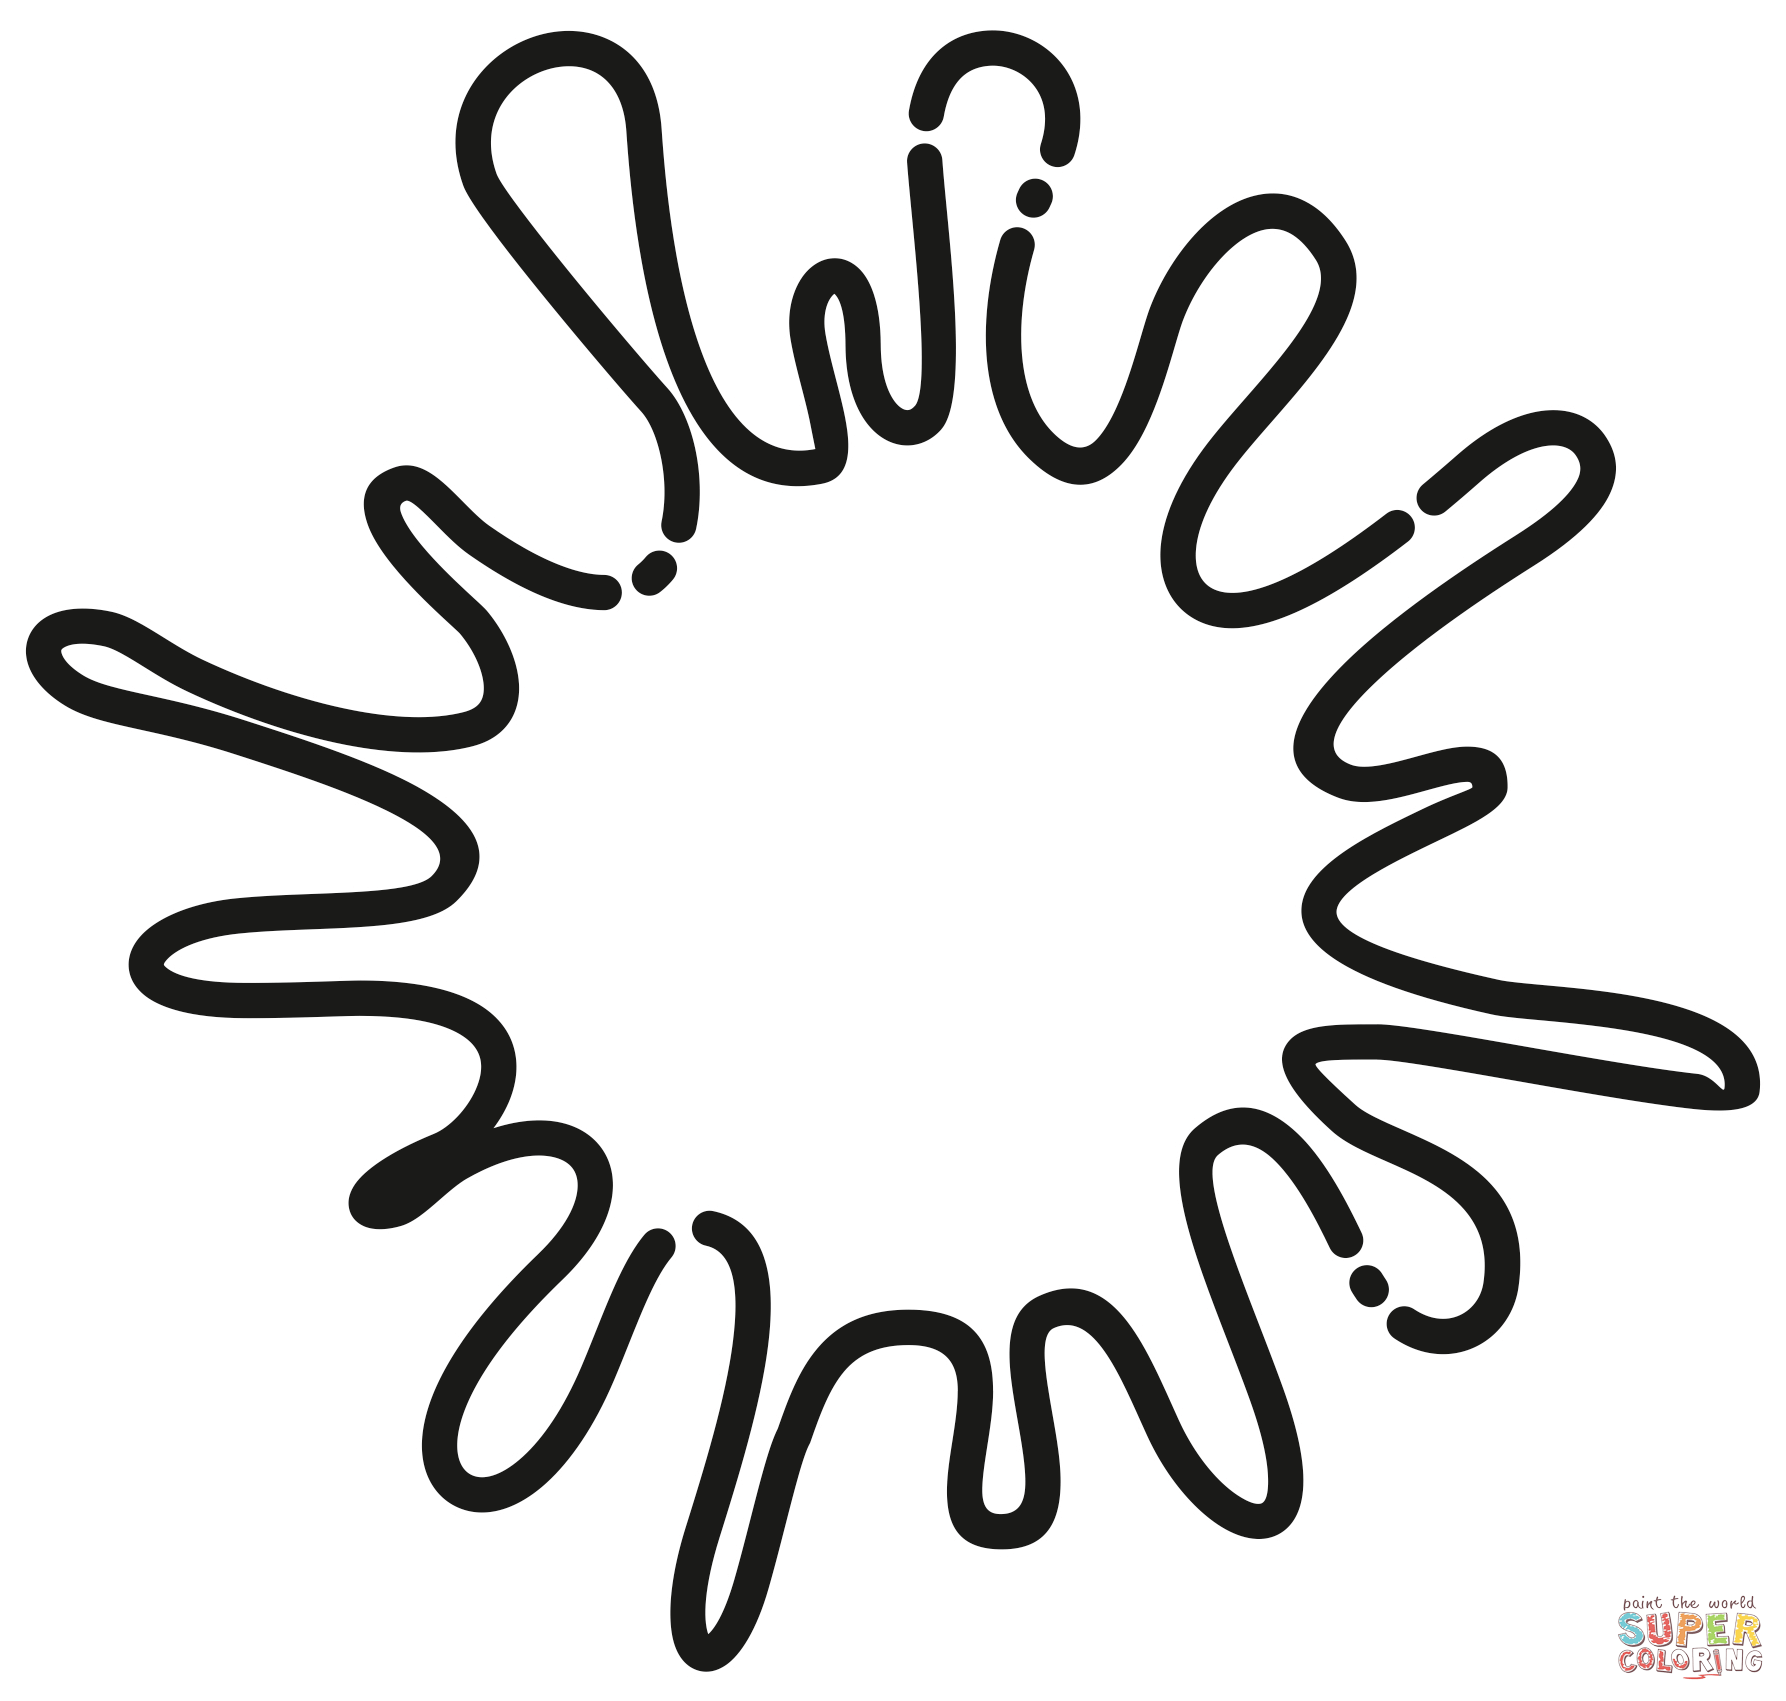 Splats coloring page free printable coloring pages